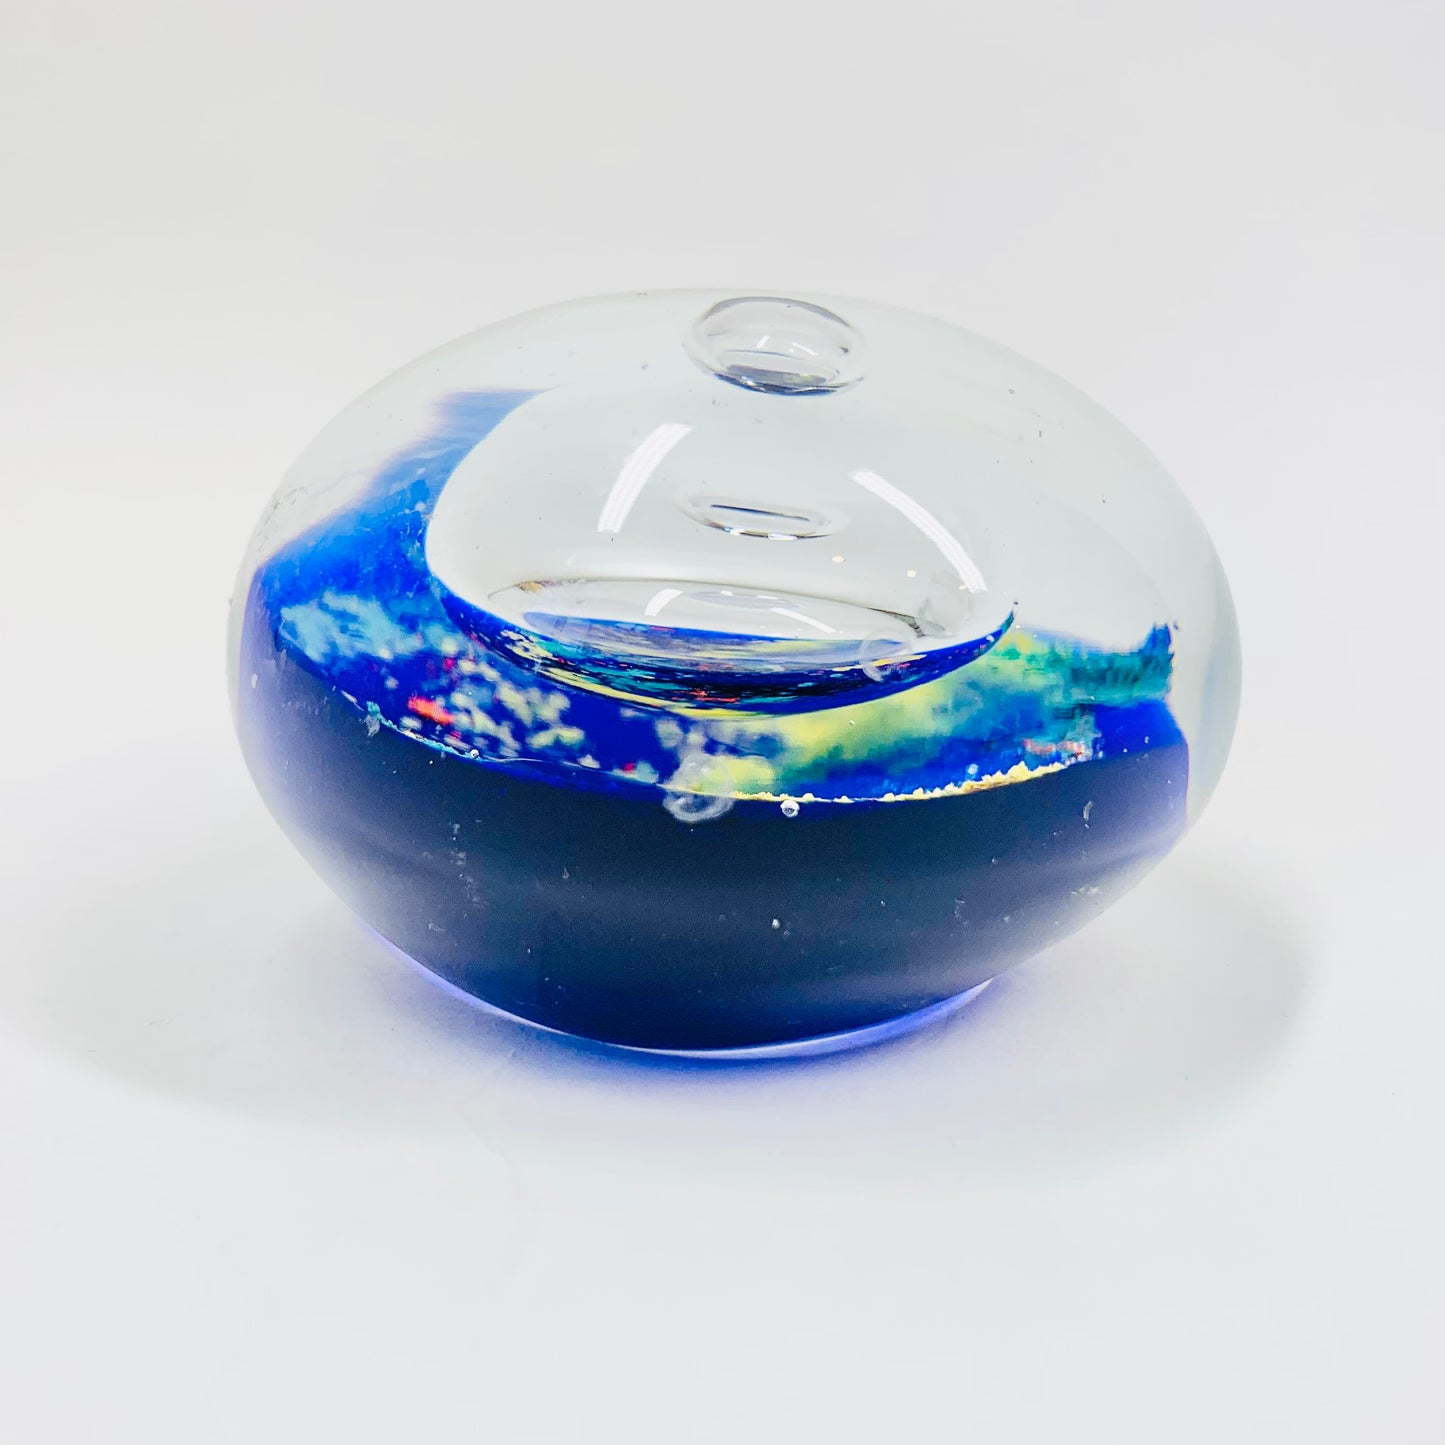 Space Age Murano cosmic glass paperweight